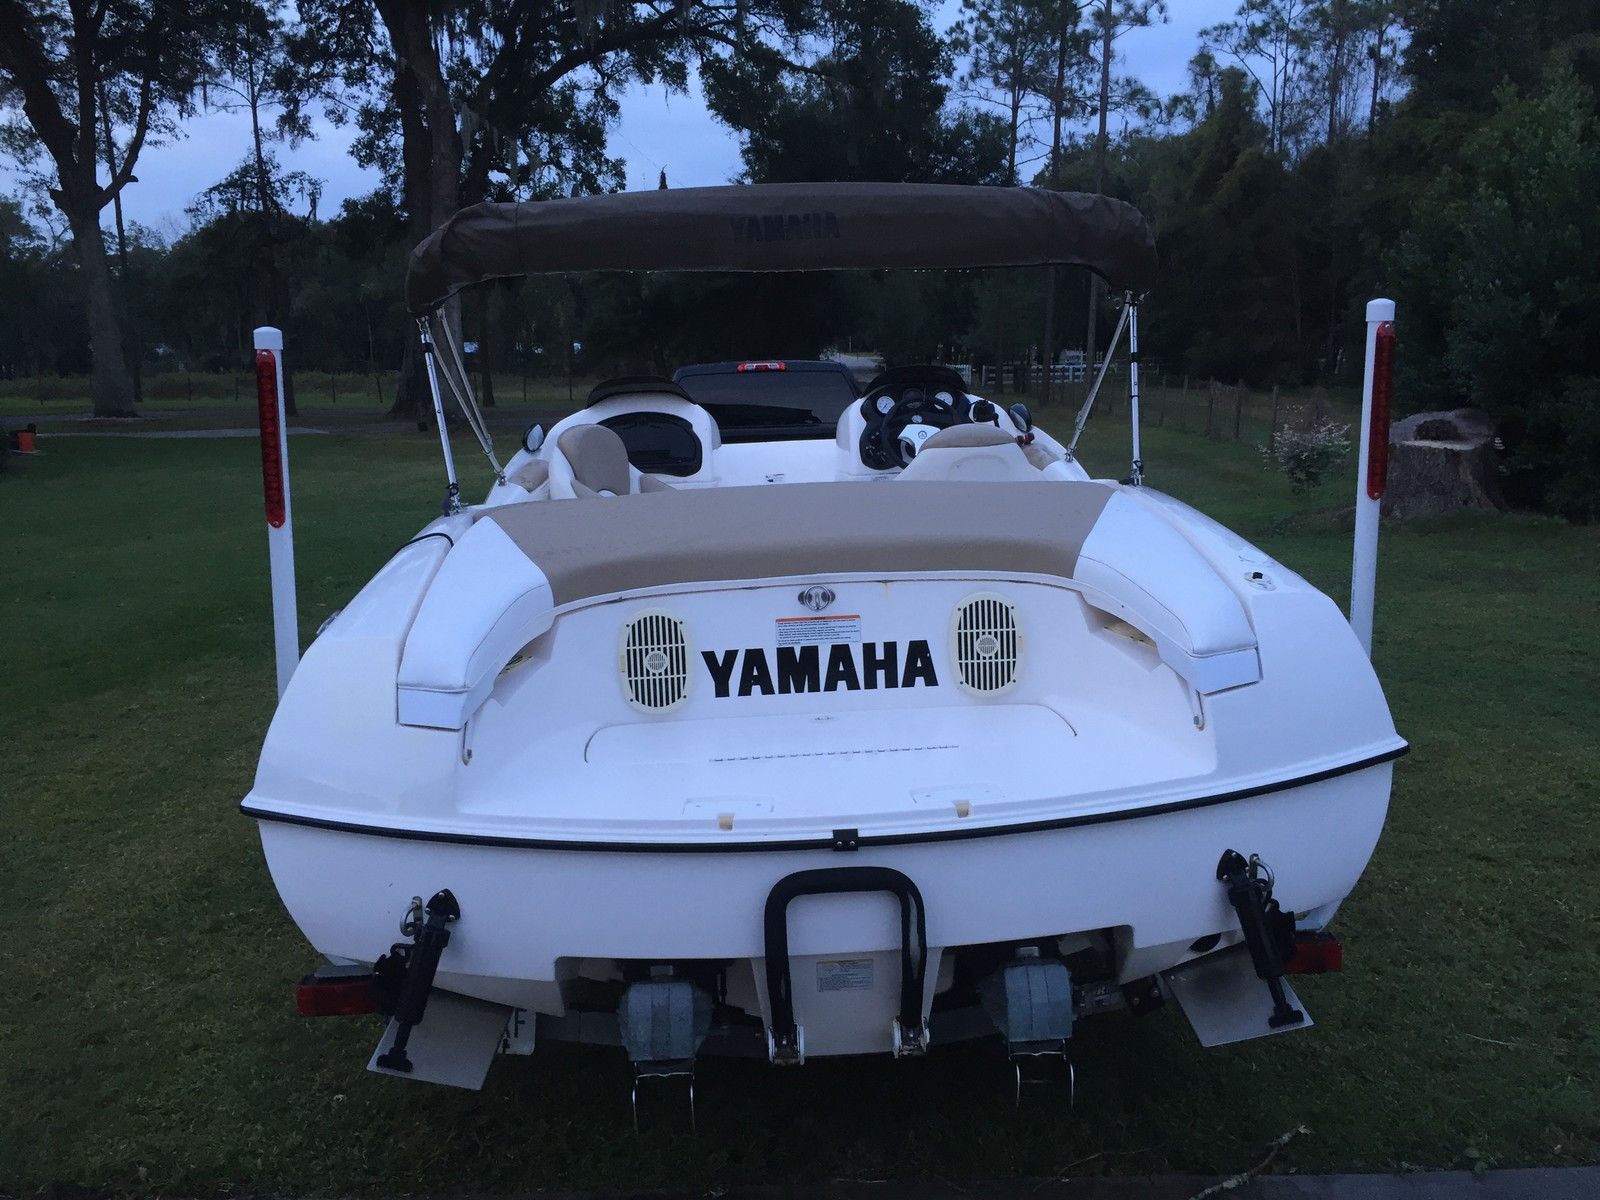 YAMAHA LS 2000 1999 for sale for $6,000 - Boats-from-USA.com